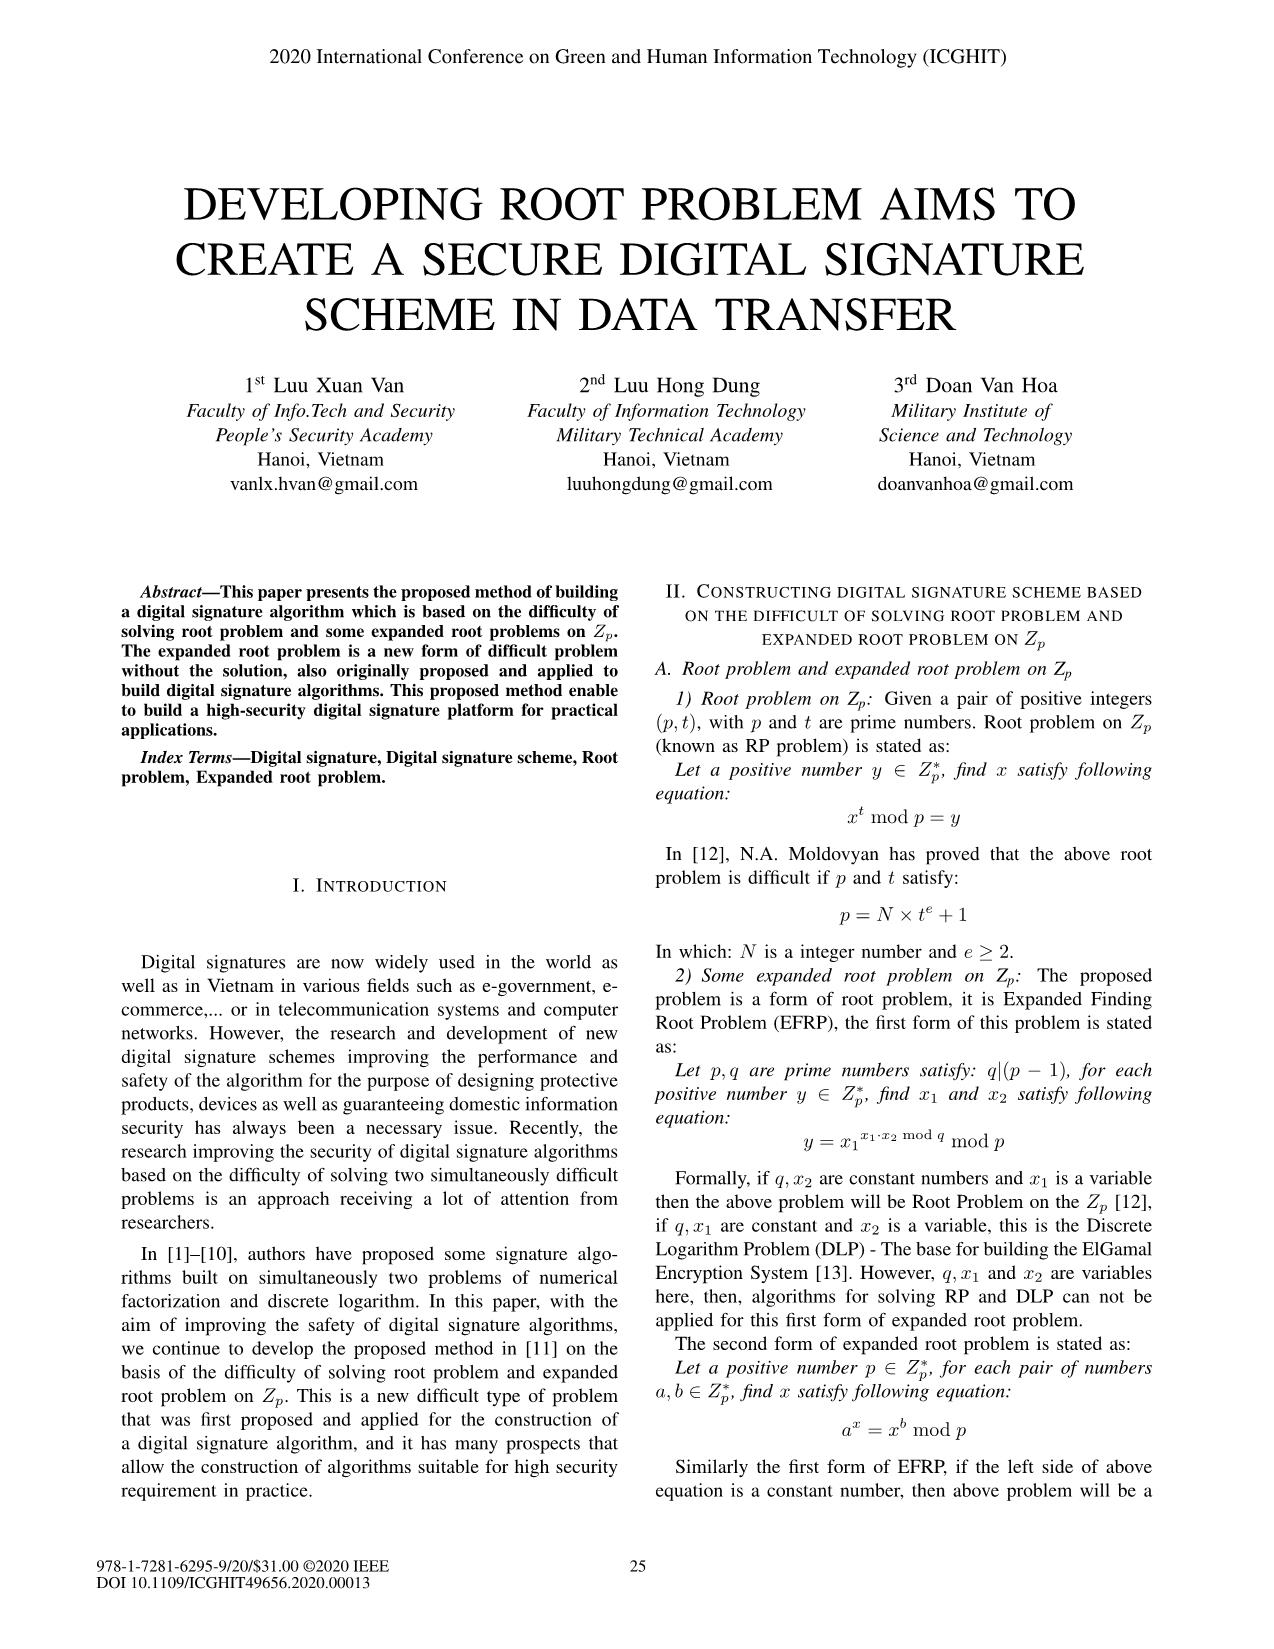 Developing root problem aims to create a secure digital signature scheme in data transfer trang 1